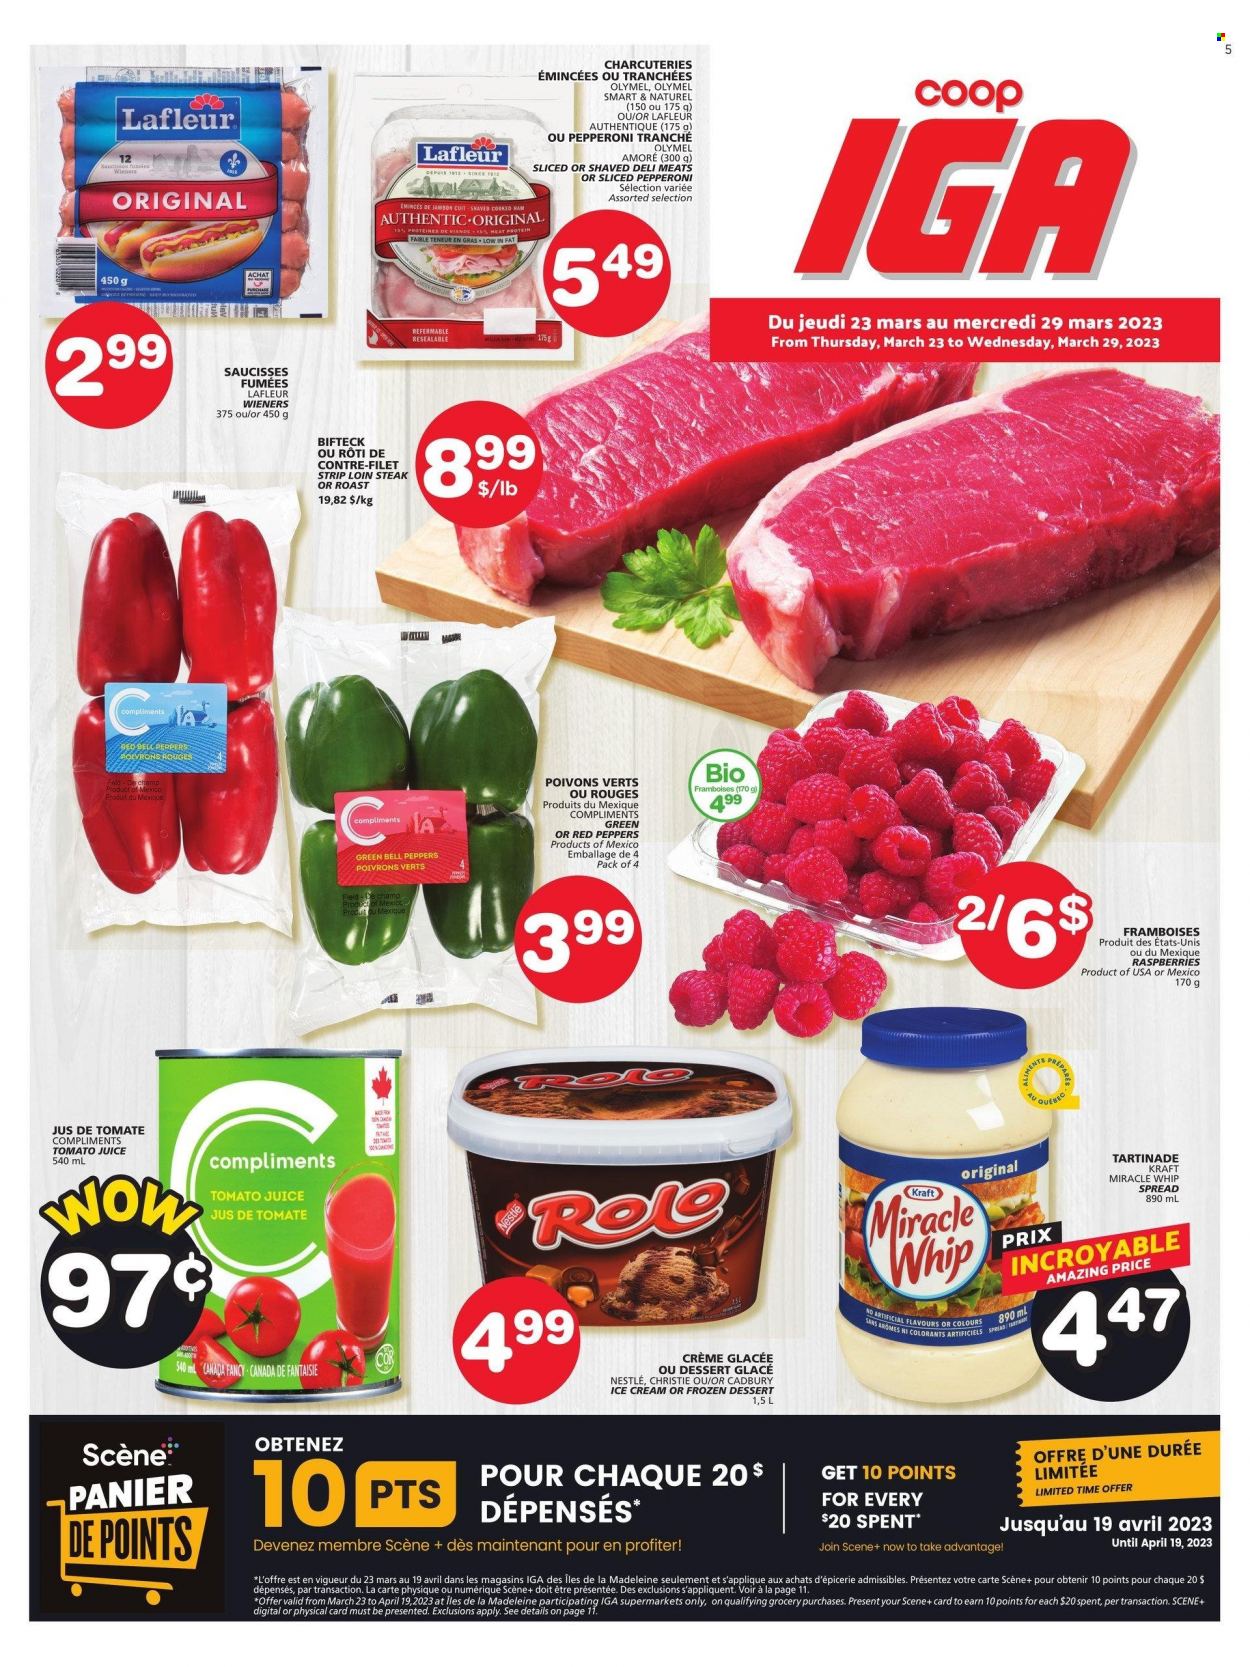 thumbnail - IGA Flyer - March 23, 2023 - March 29, 2023 - Sales products - bell peppers, peppers, red peppers, Kraft®, roast, pepperoni, Miracle Whip, ice cream, Mars, Cadbury, tomato juice, juice, steak, Nestlé. Page 5.